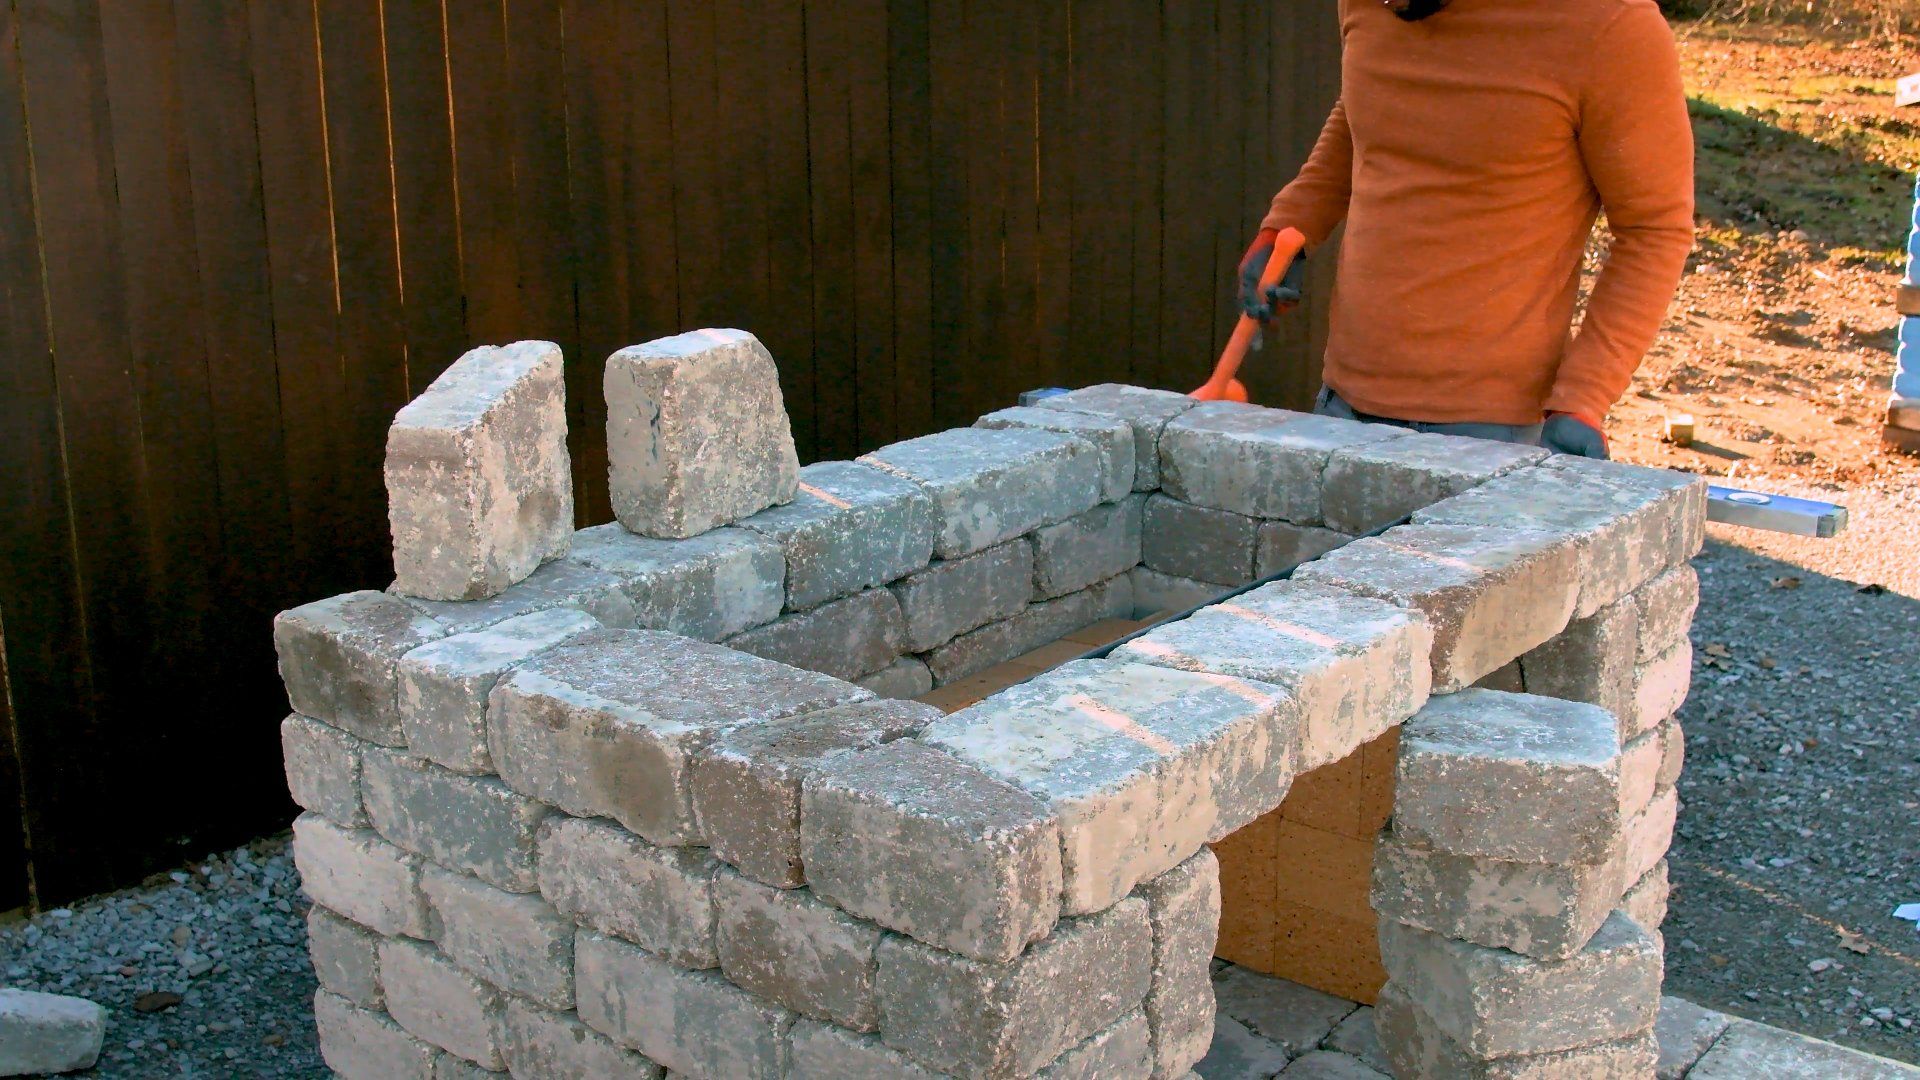 The fiirst course of block are laid along the angle. Note the temporary stack of blocks to support the course from tipping and falling out.